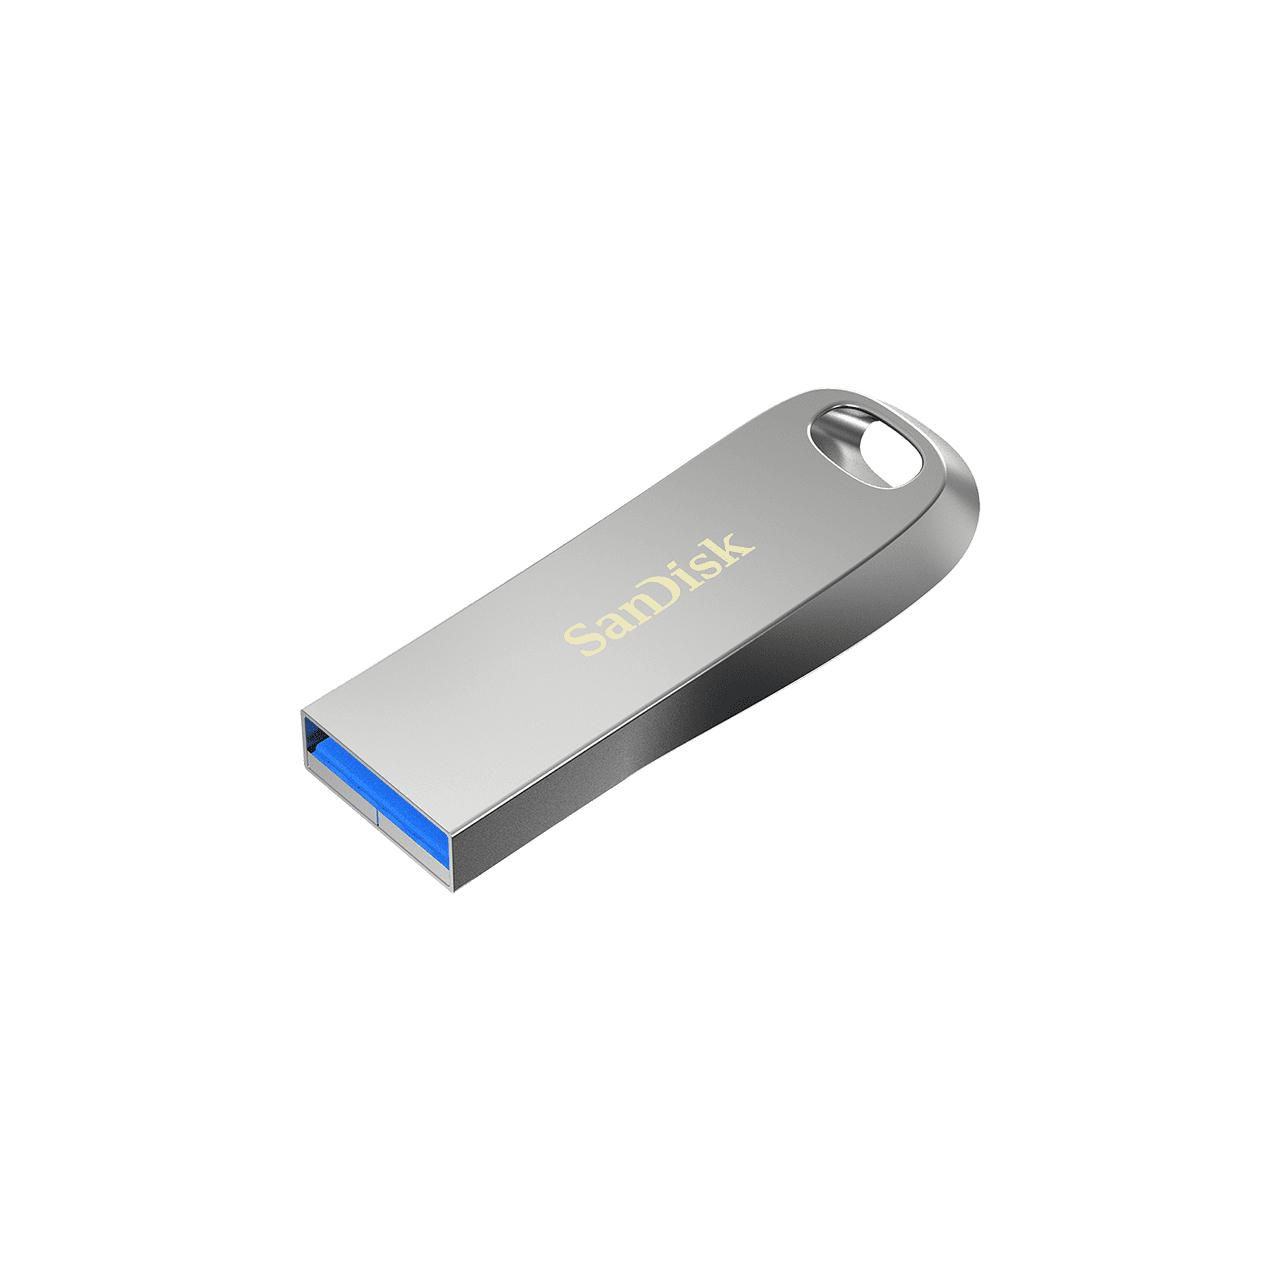 Sandisk SDCZ74-512G-G46 W128264882 Ultra Luxe Usb Flash Drive 